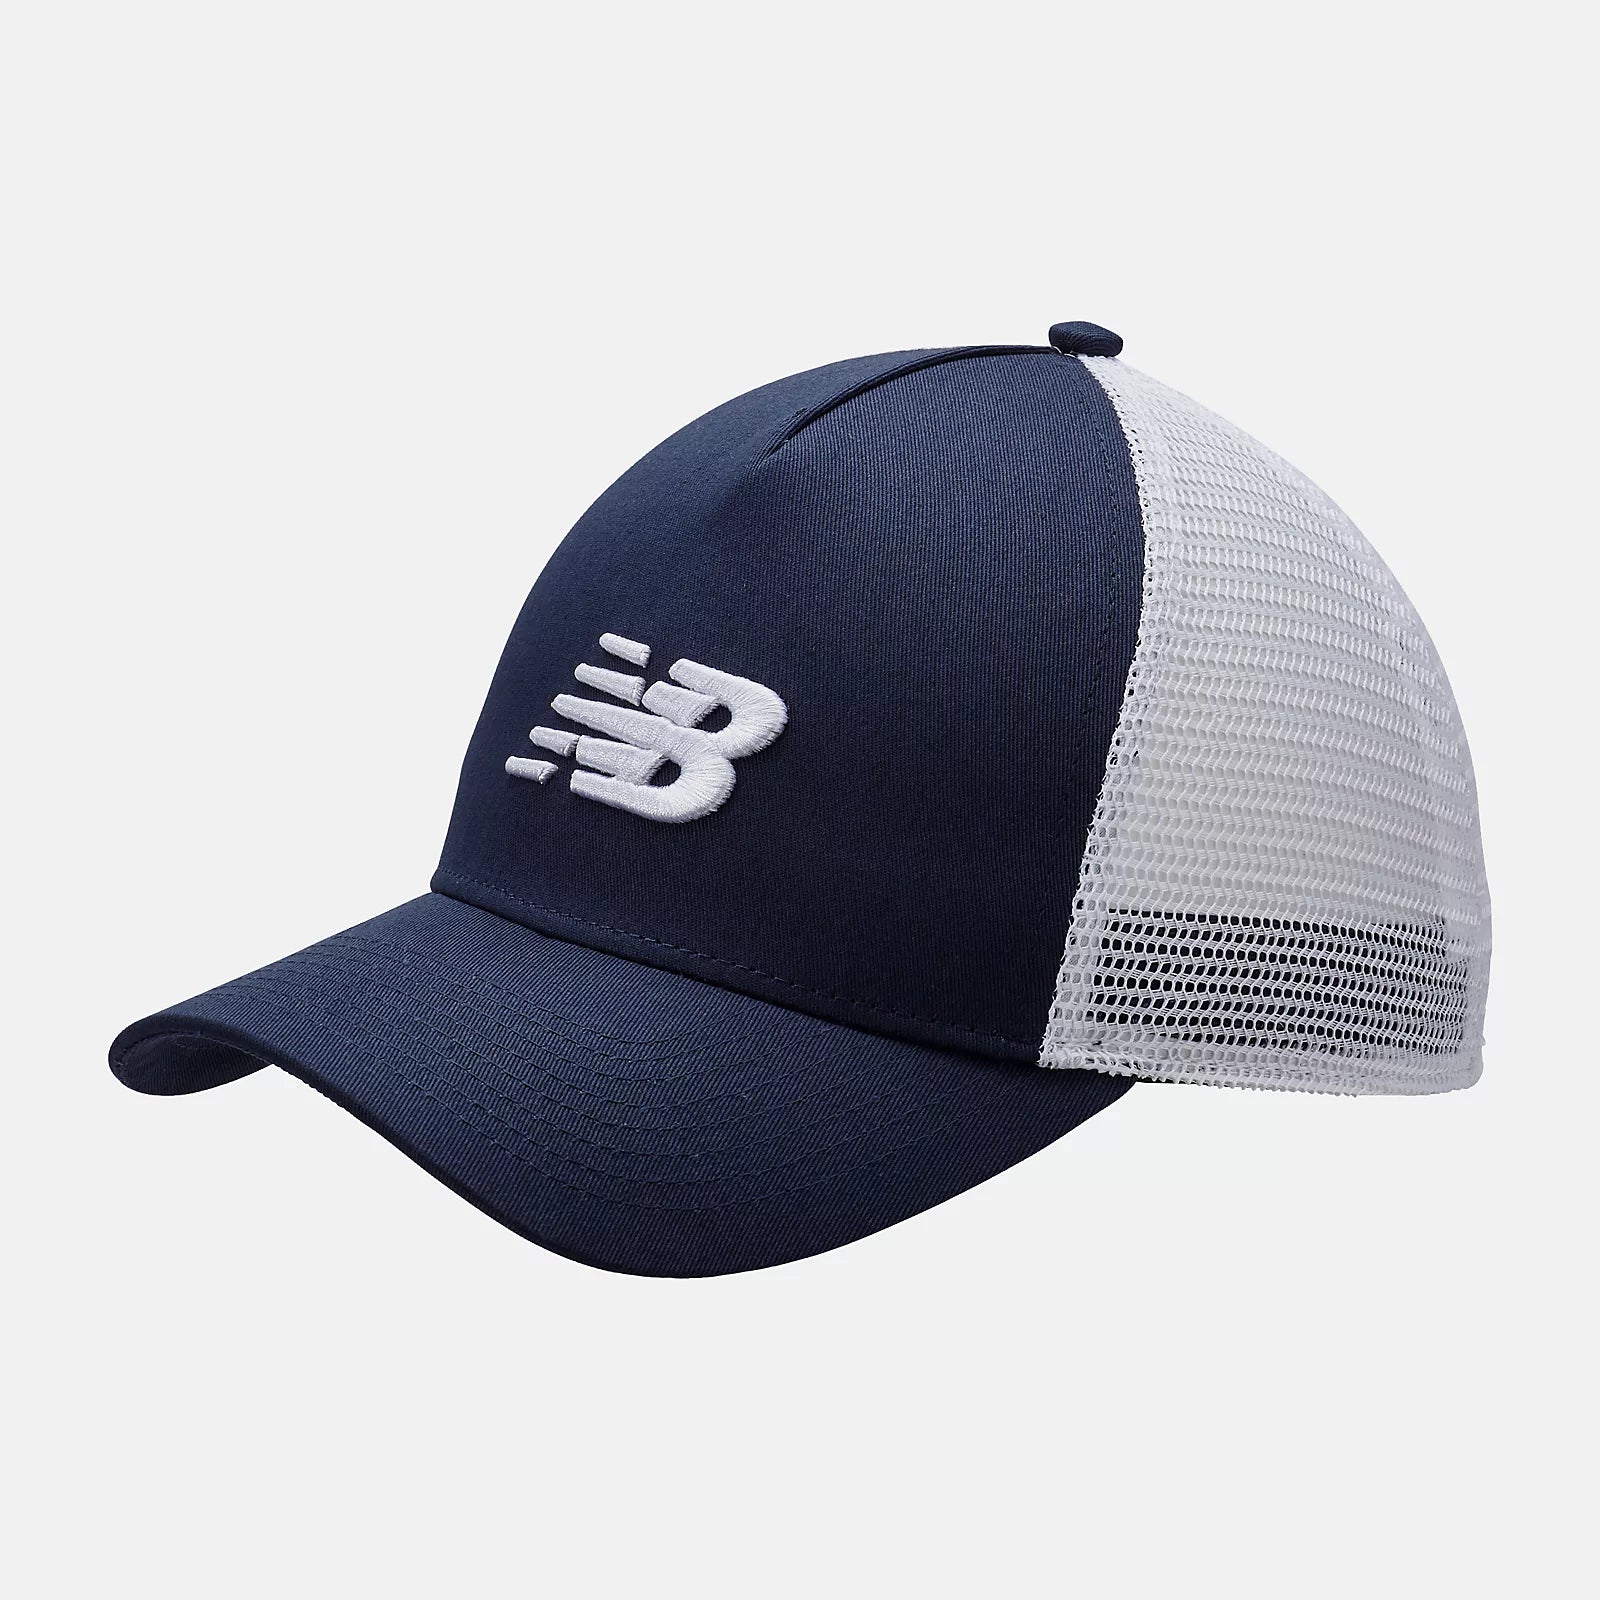 NEW BALANCE Lifestyle Athletics Trucker in Natural Indigo LAH01001 O/S NATURAL INDIGO FROM EIGHTYWINGOLD - OFFICIAL BRAND PARTNER